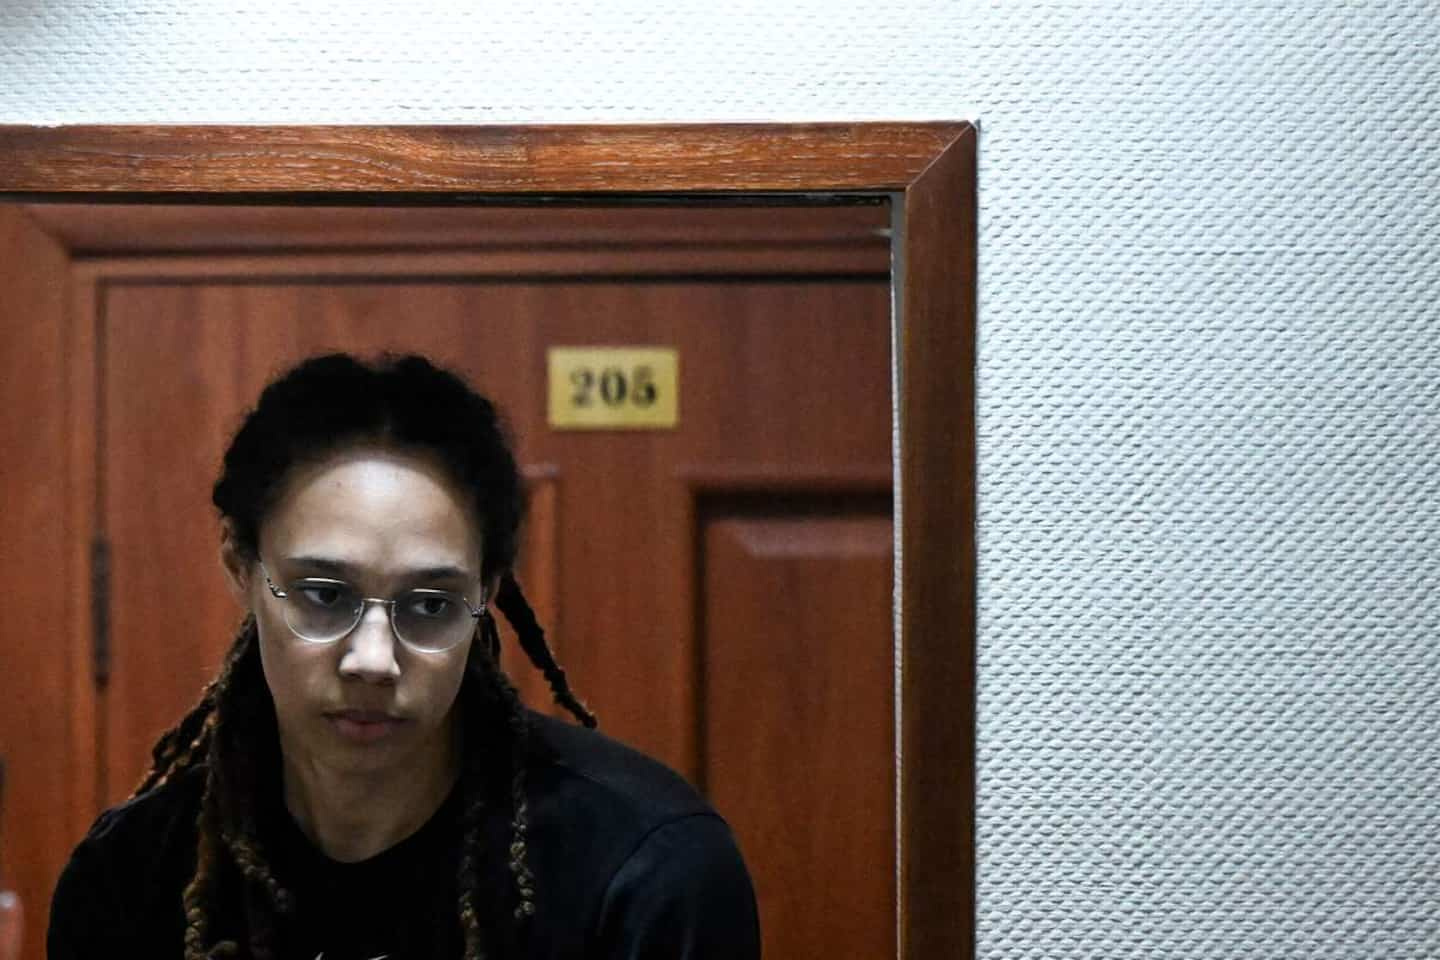 Russian Bout and American Griner not informed of possible prisoner exchange